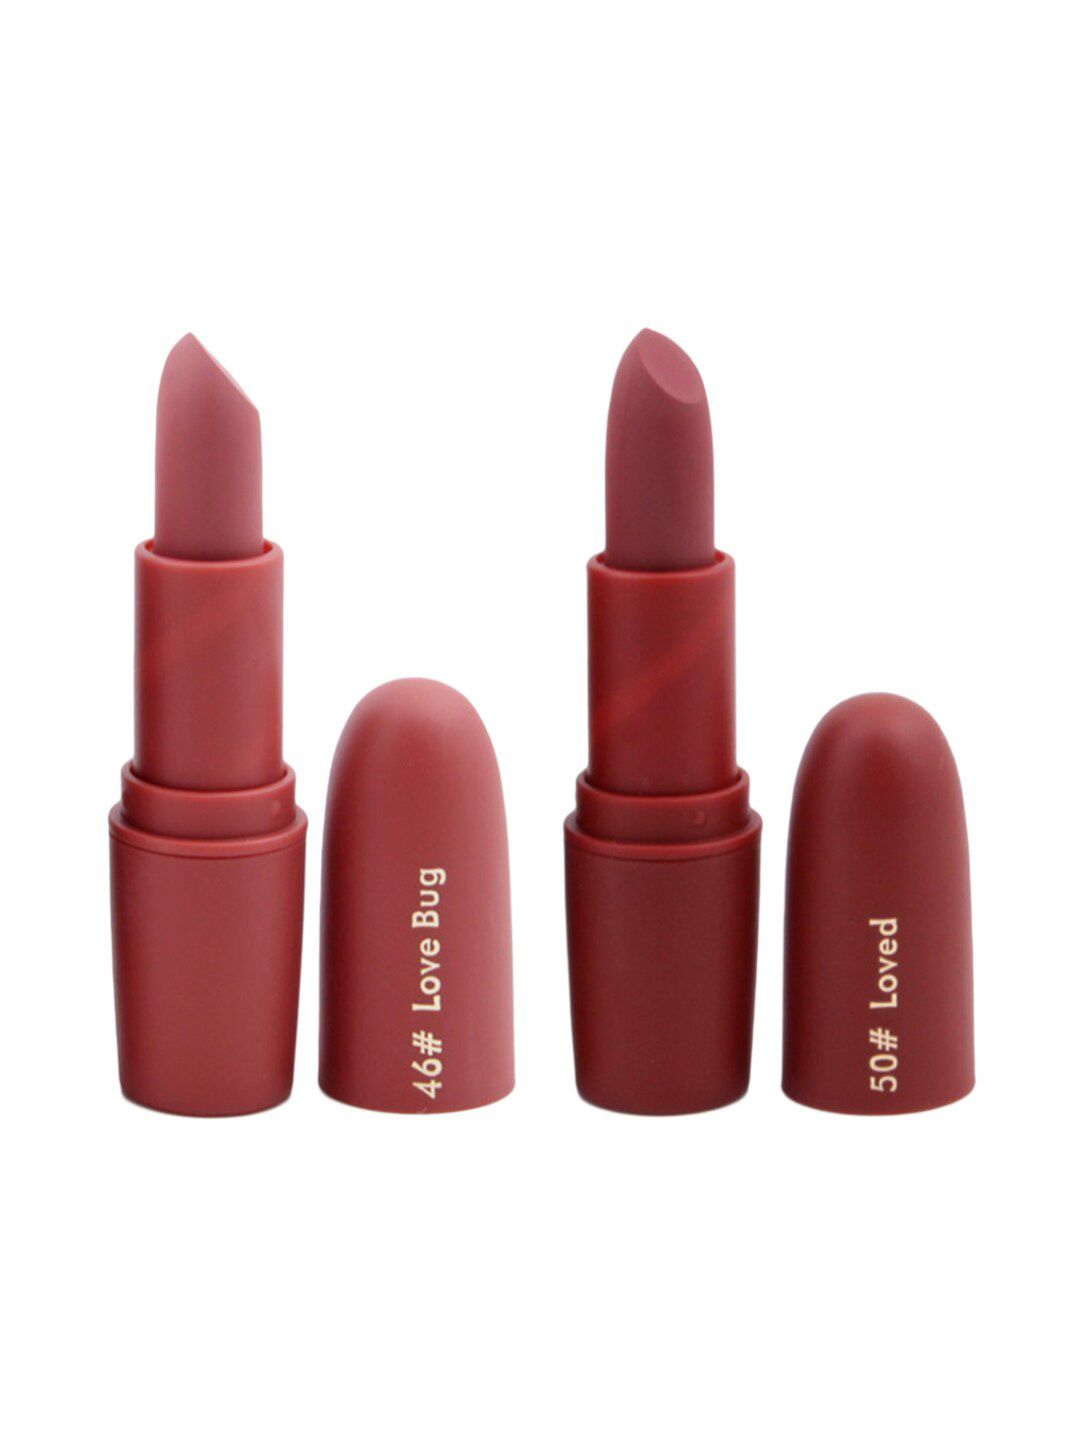 MISS ROSE Professional Make-Up Set of 2 Matte Creamy Lipsticks - Love Bug 46 & Loved 50 Price in India